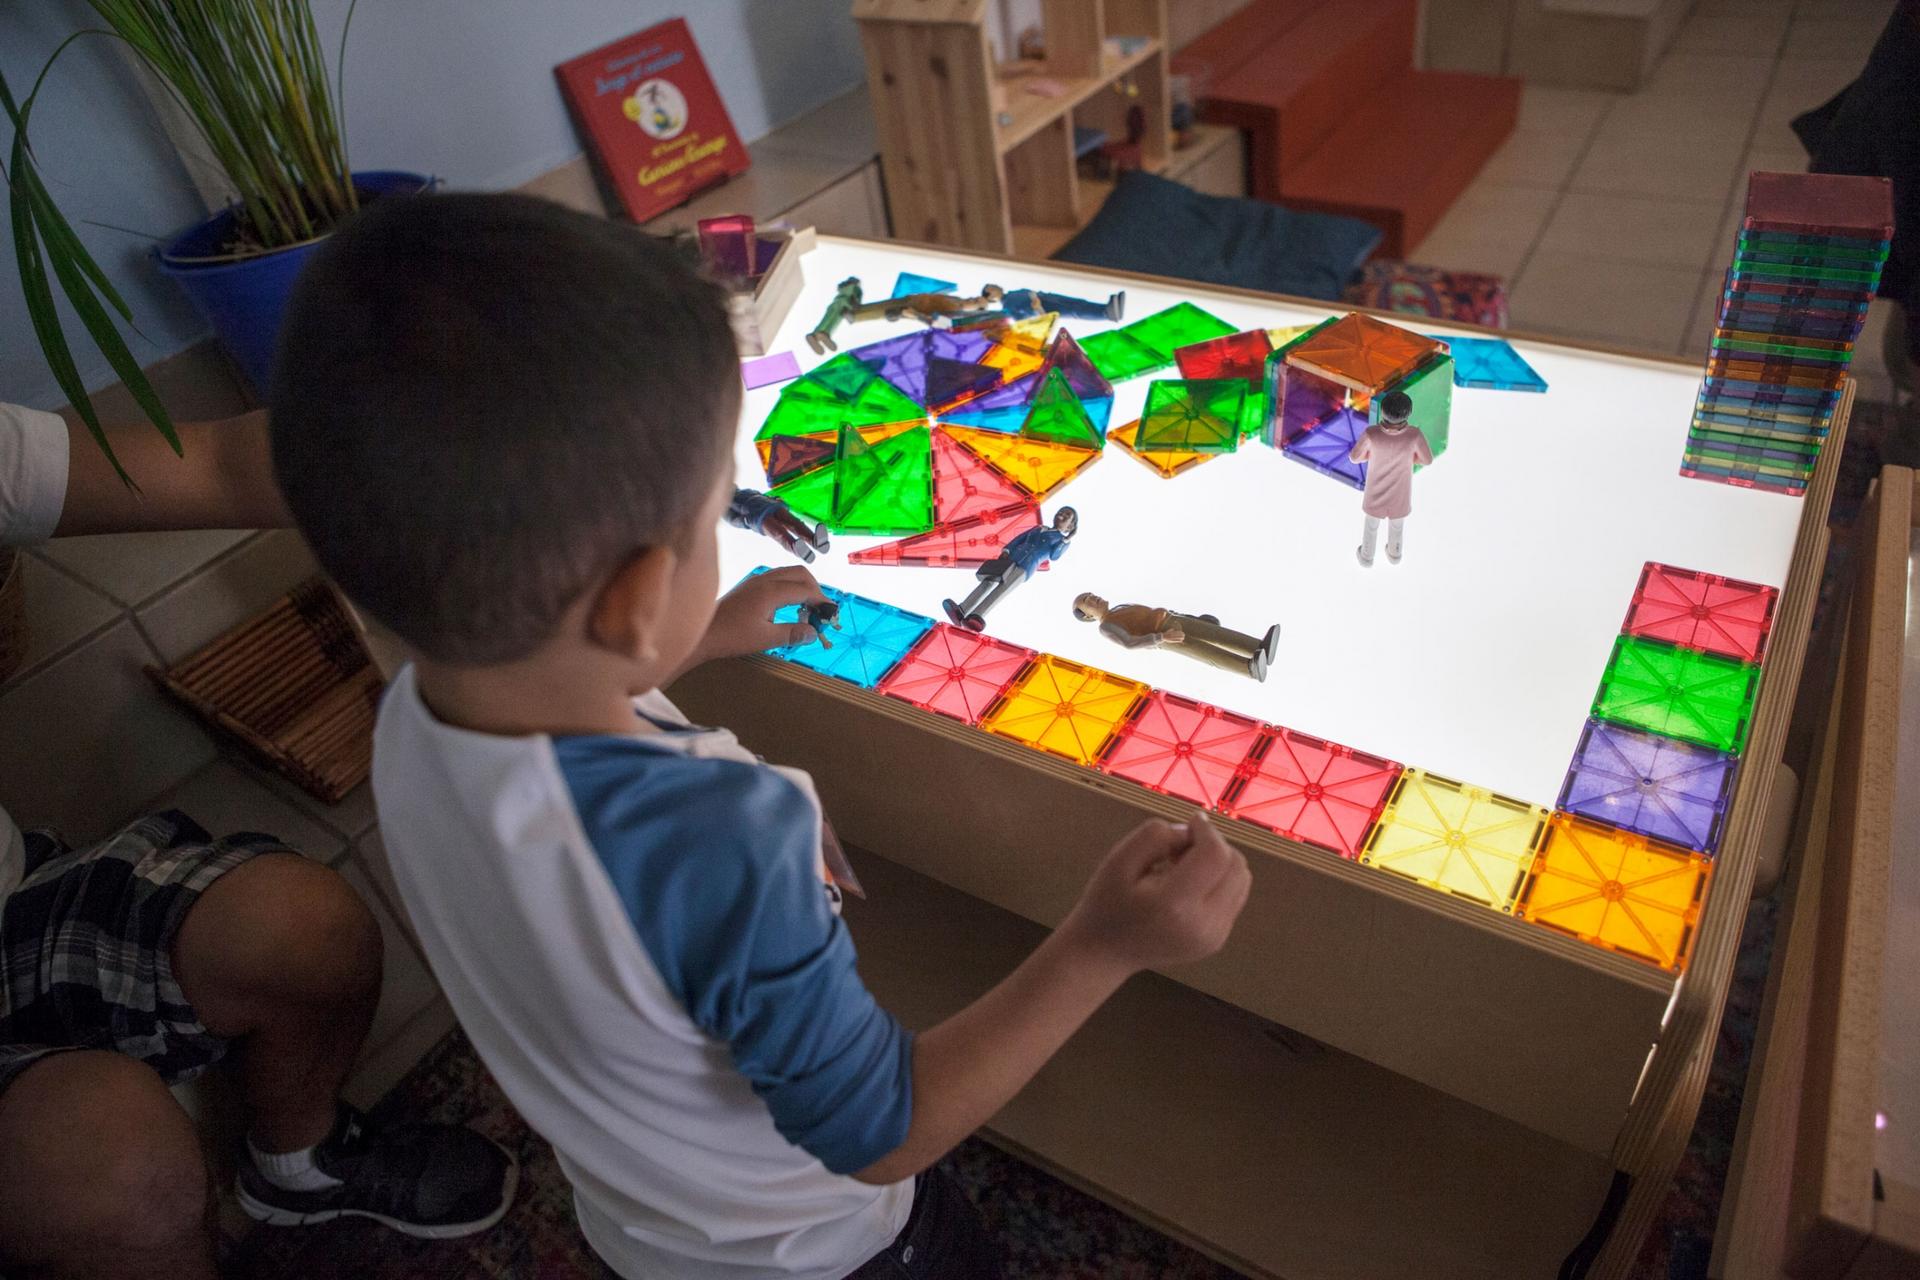 Three-year-old Kevin is shown playing at a table with color-squares illuminated by a table light.